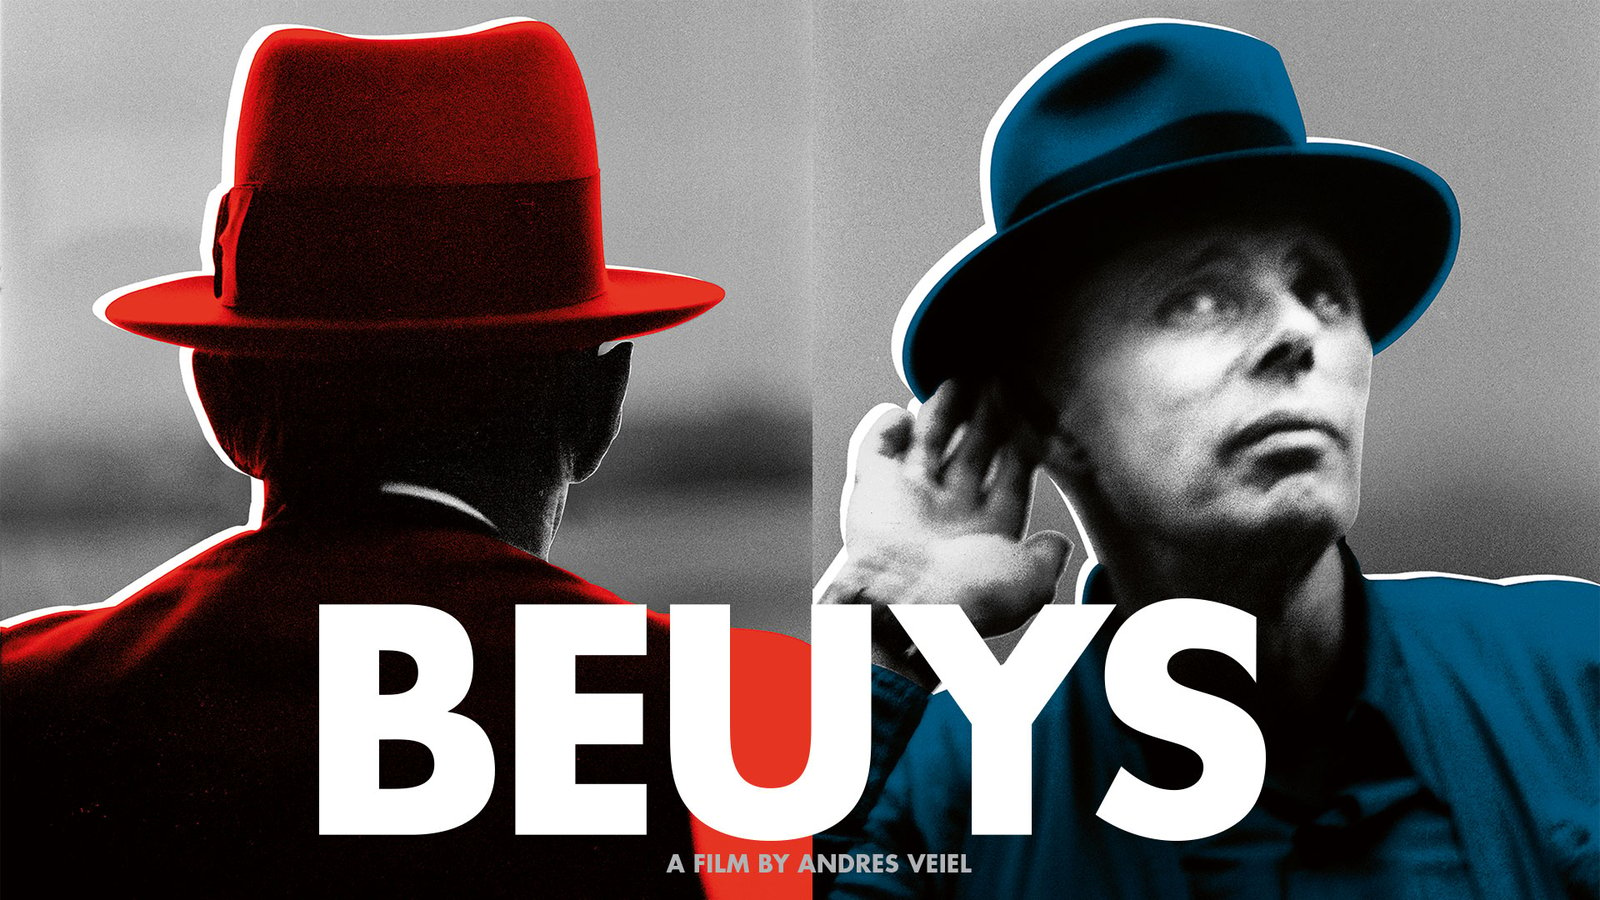 Beuys - The Life and Work of a Innovative Artist Joseph Beuys